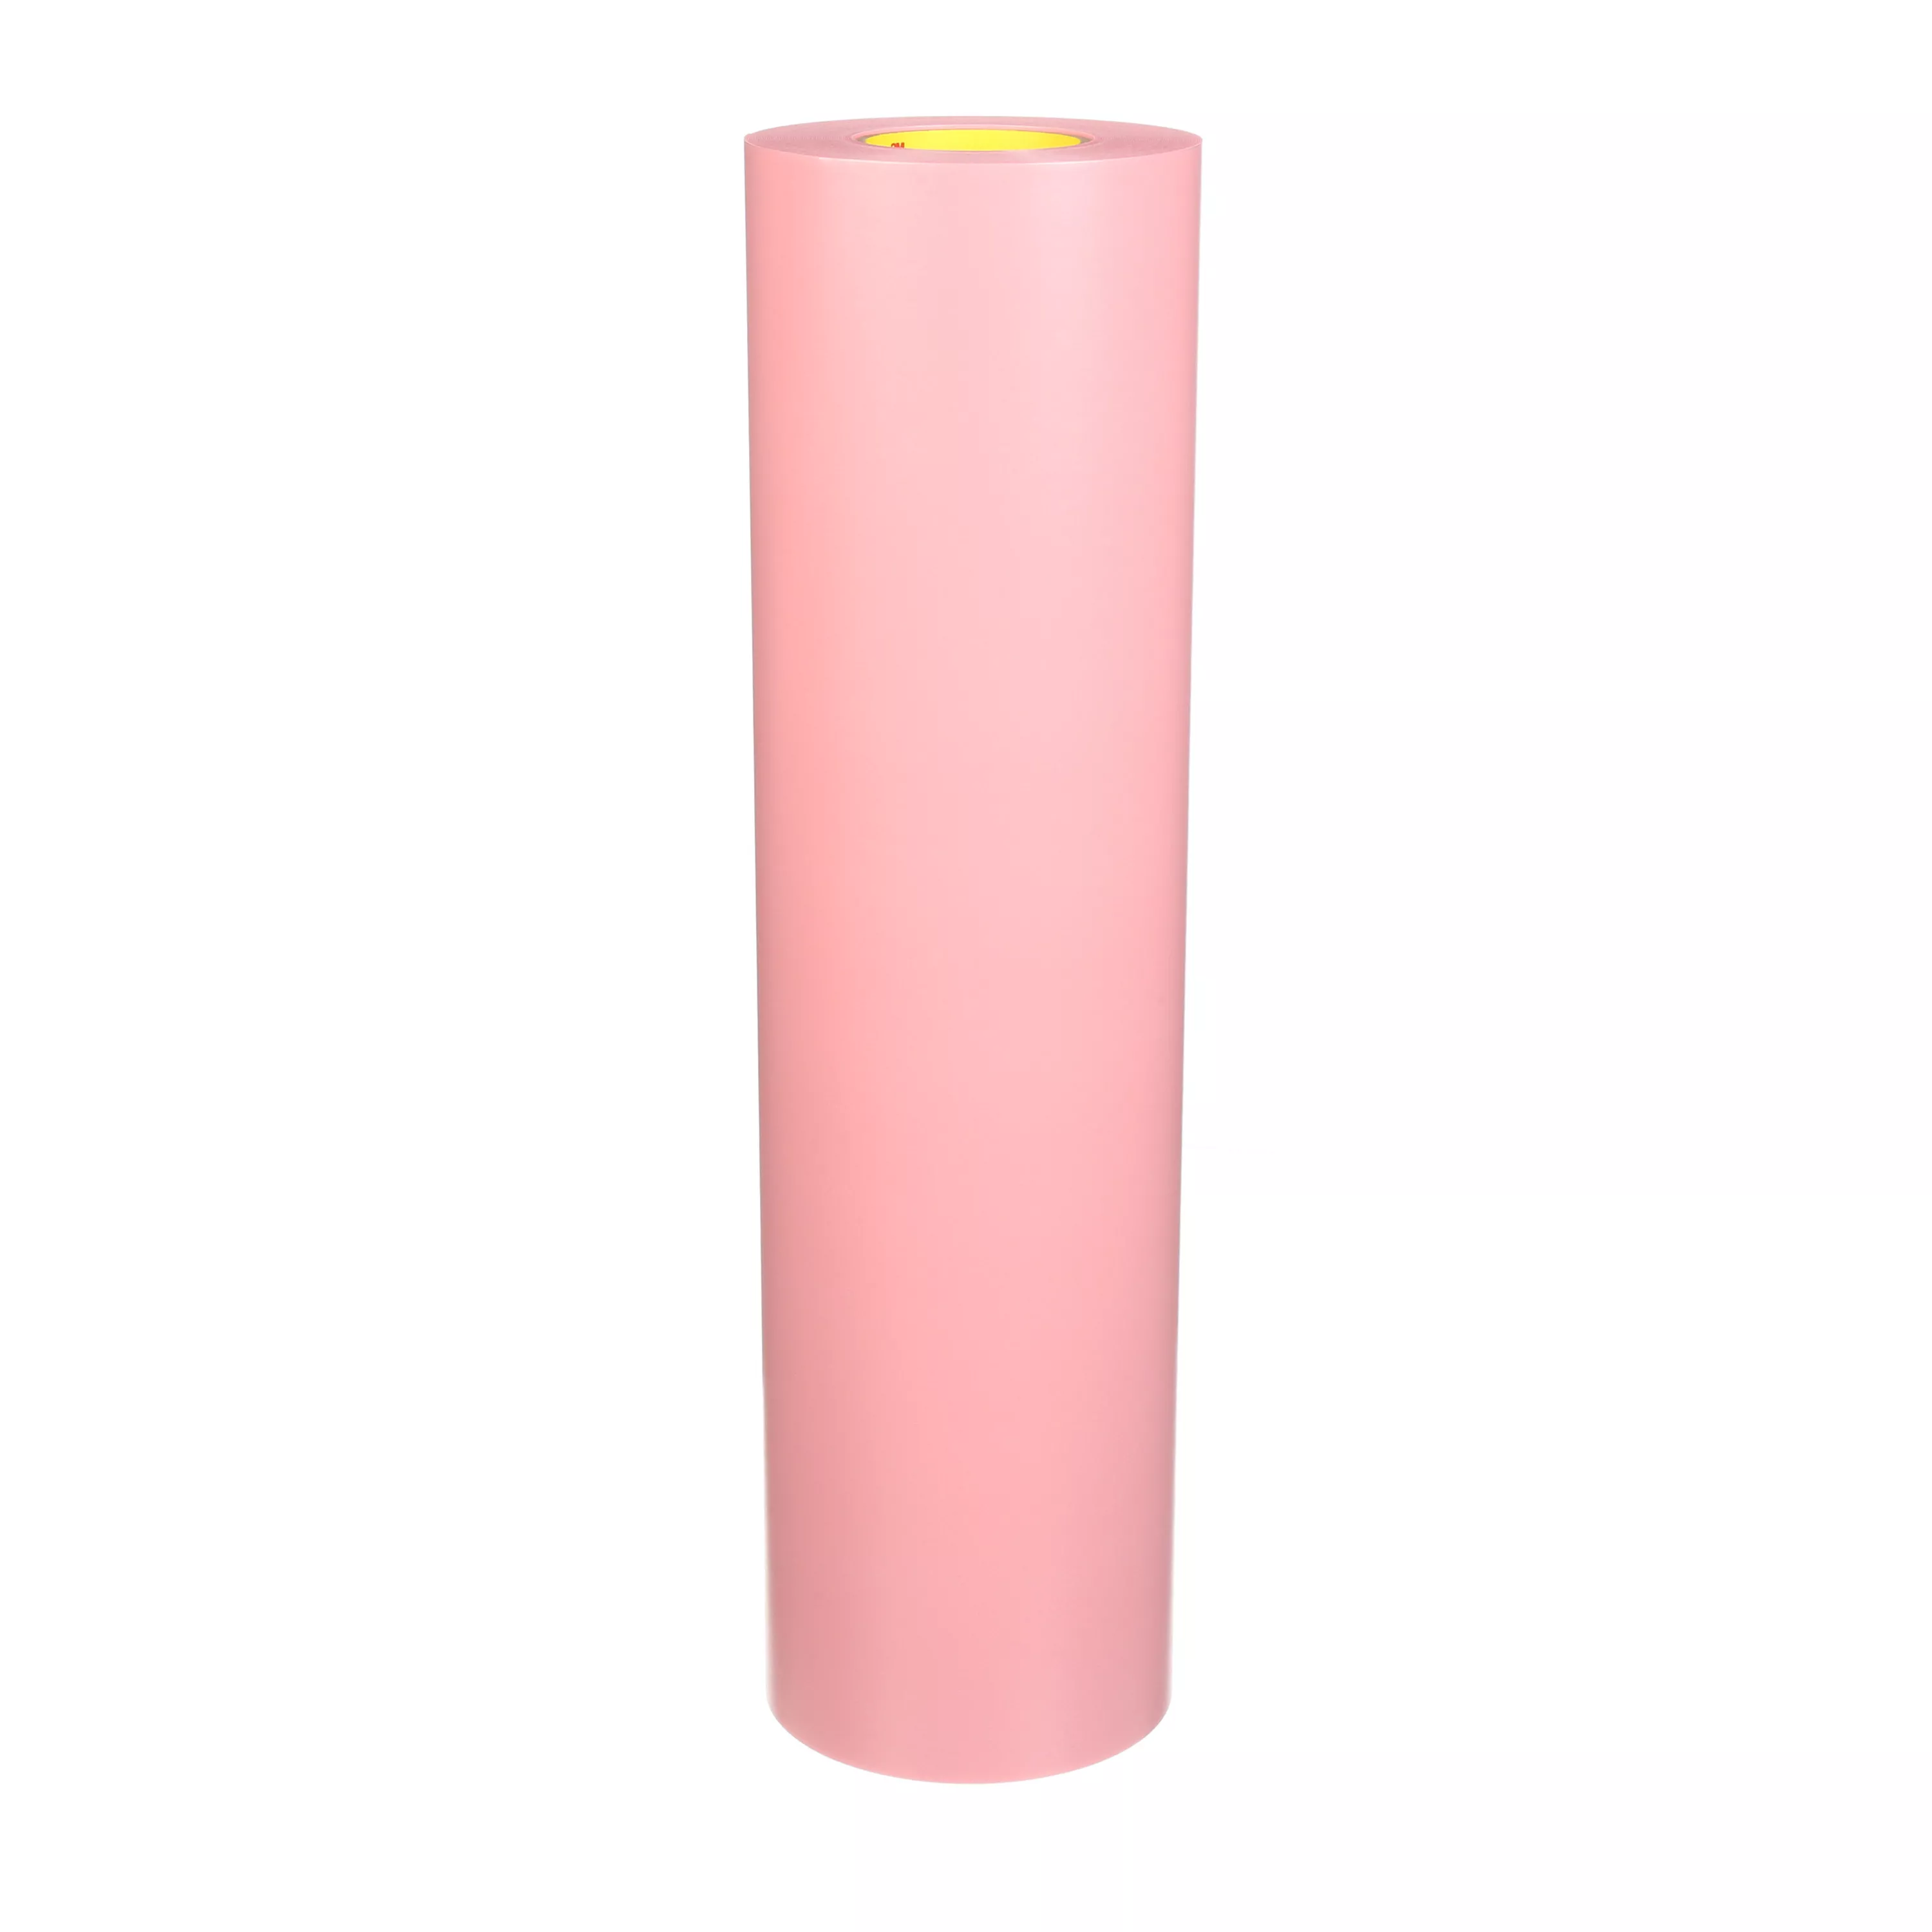 3M™ Cushion-Mount™ Plus Plate Mounting Tape E1920HS, Pink, 54 in x
25
yd, 20 mil, 1 Roll/Case